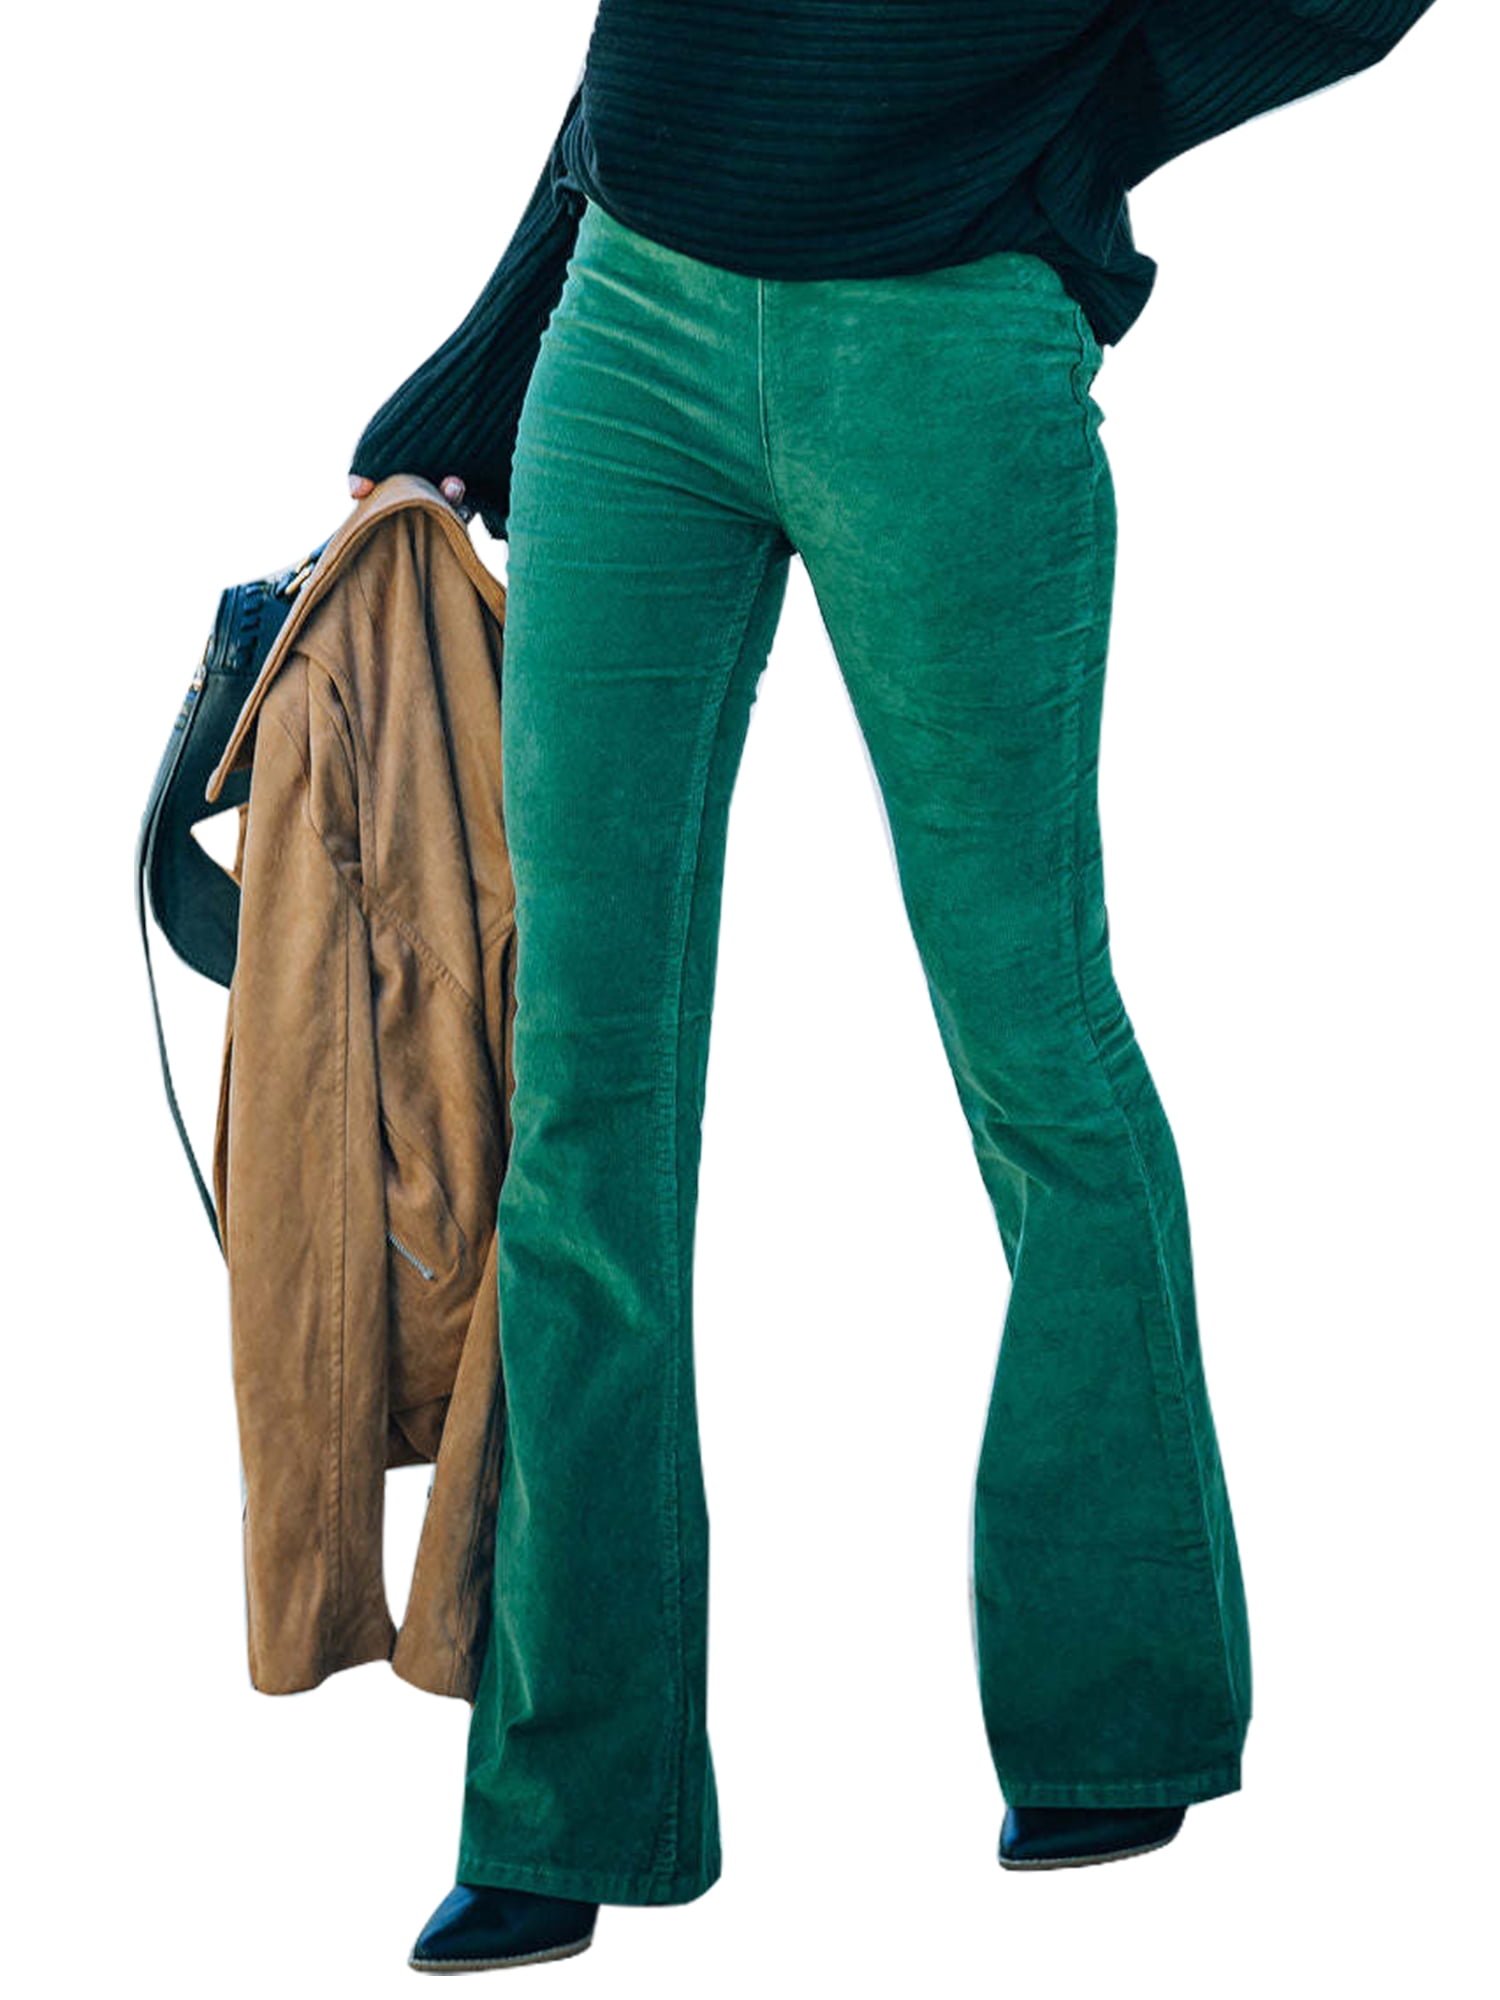 Green Leisure Trousers | Ladies Trousers | James Meade